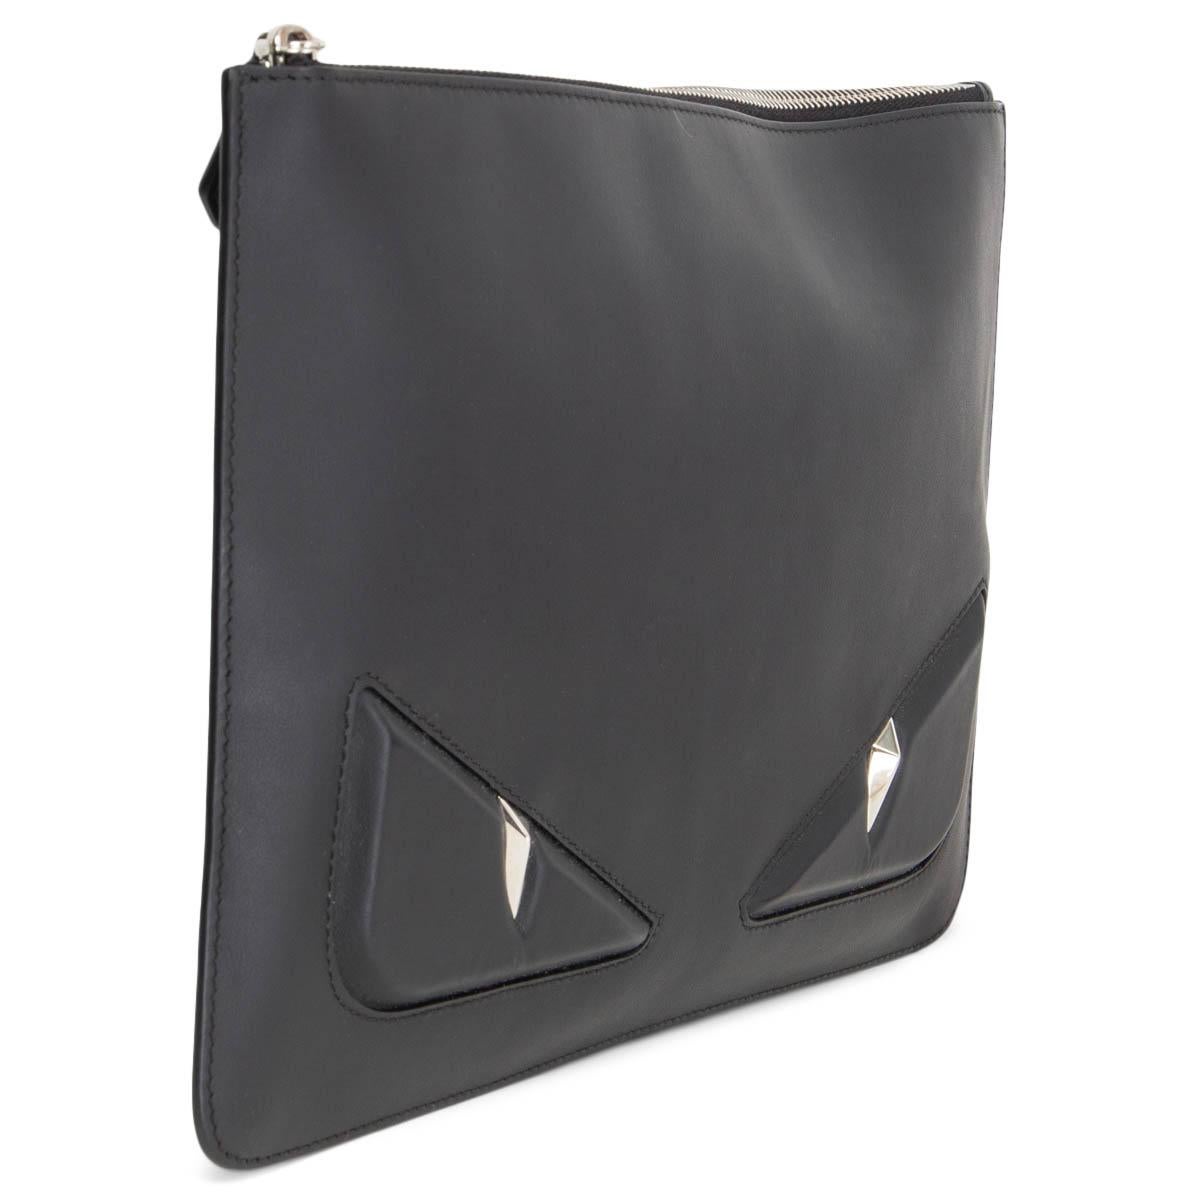 100% authentic Fendi Monster flat clutch in black leather. It features a top zip-up closure that reveals a fabric-lined interior and brand labelling. It is accented with silver-tone hardware. Has been carried and is in excellent condition. Comes